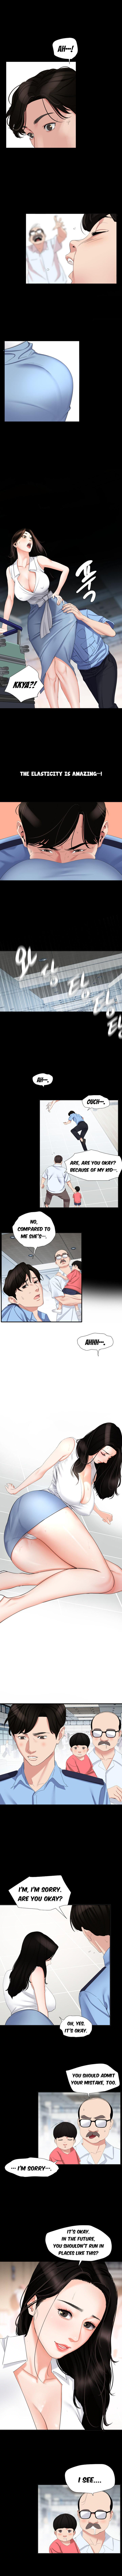 [Kkamja] Don't be like this son-in-law [English] 3